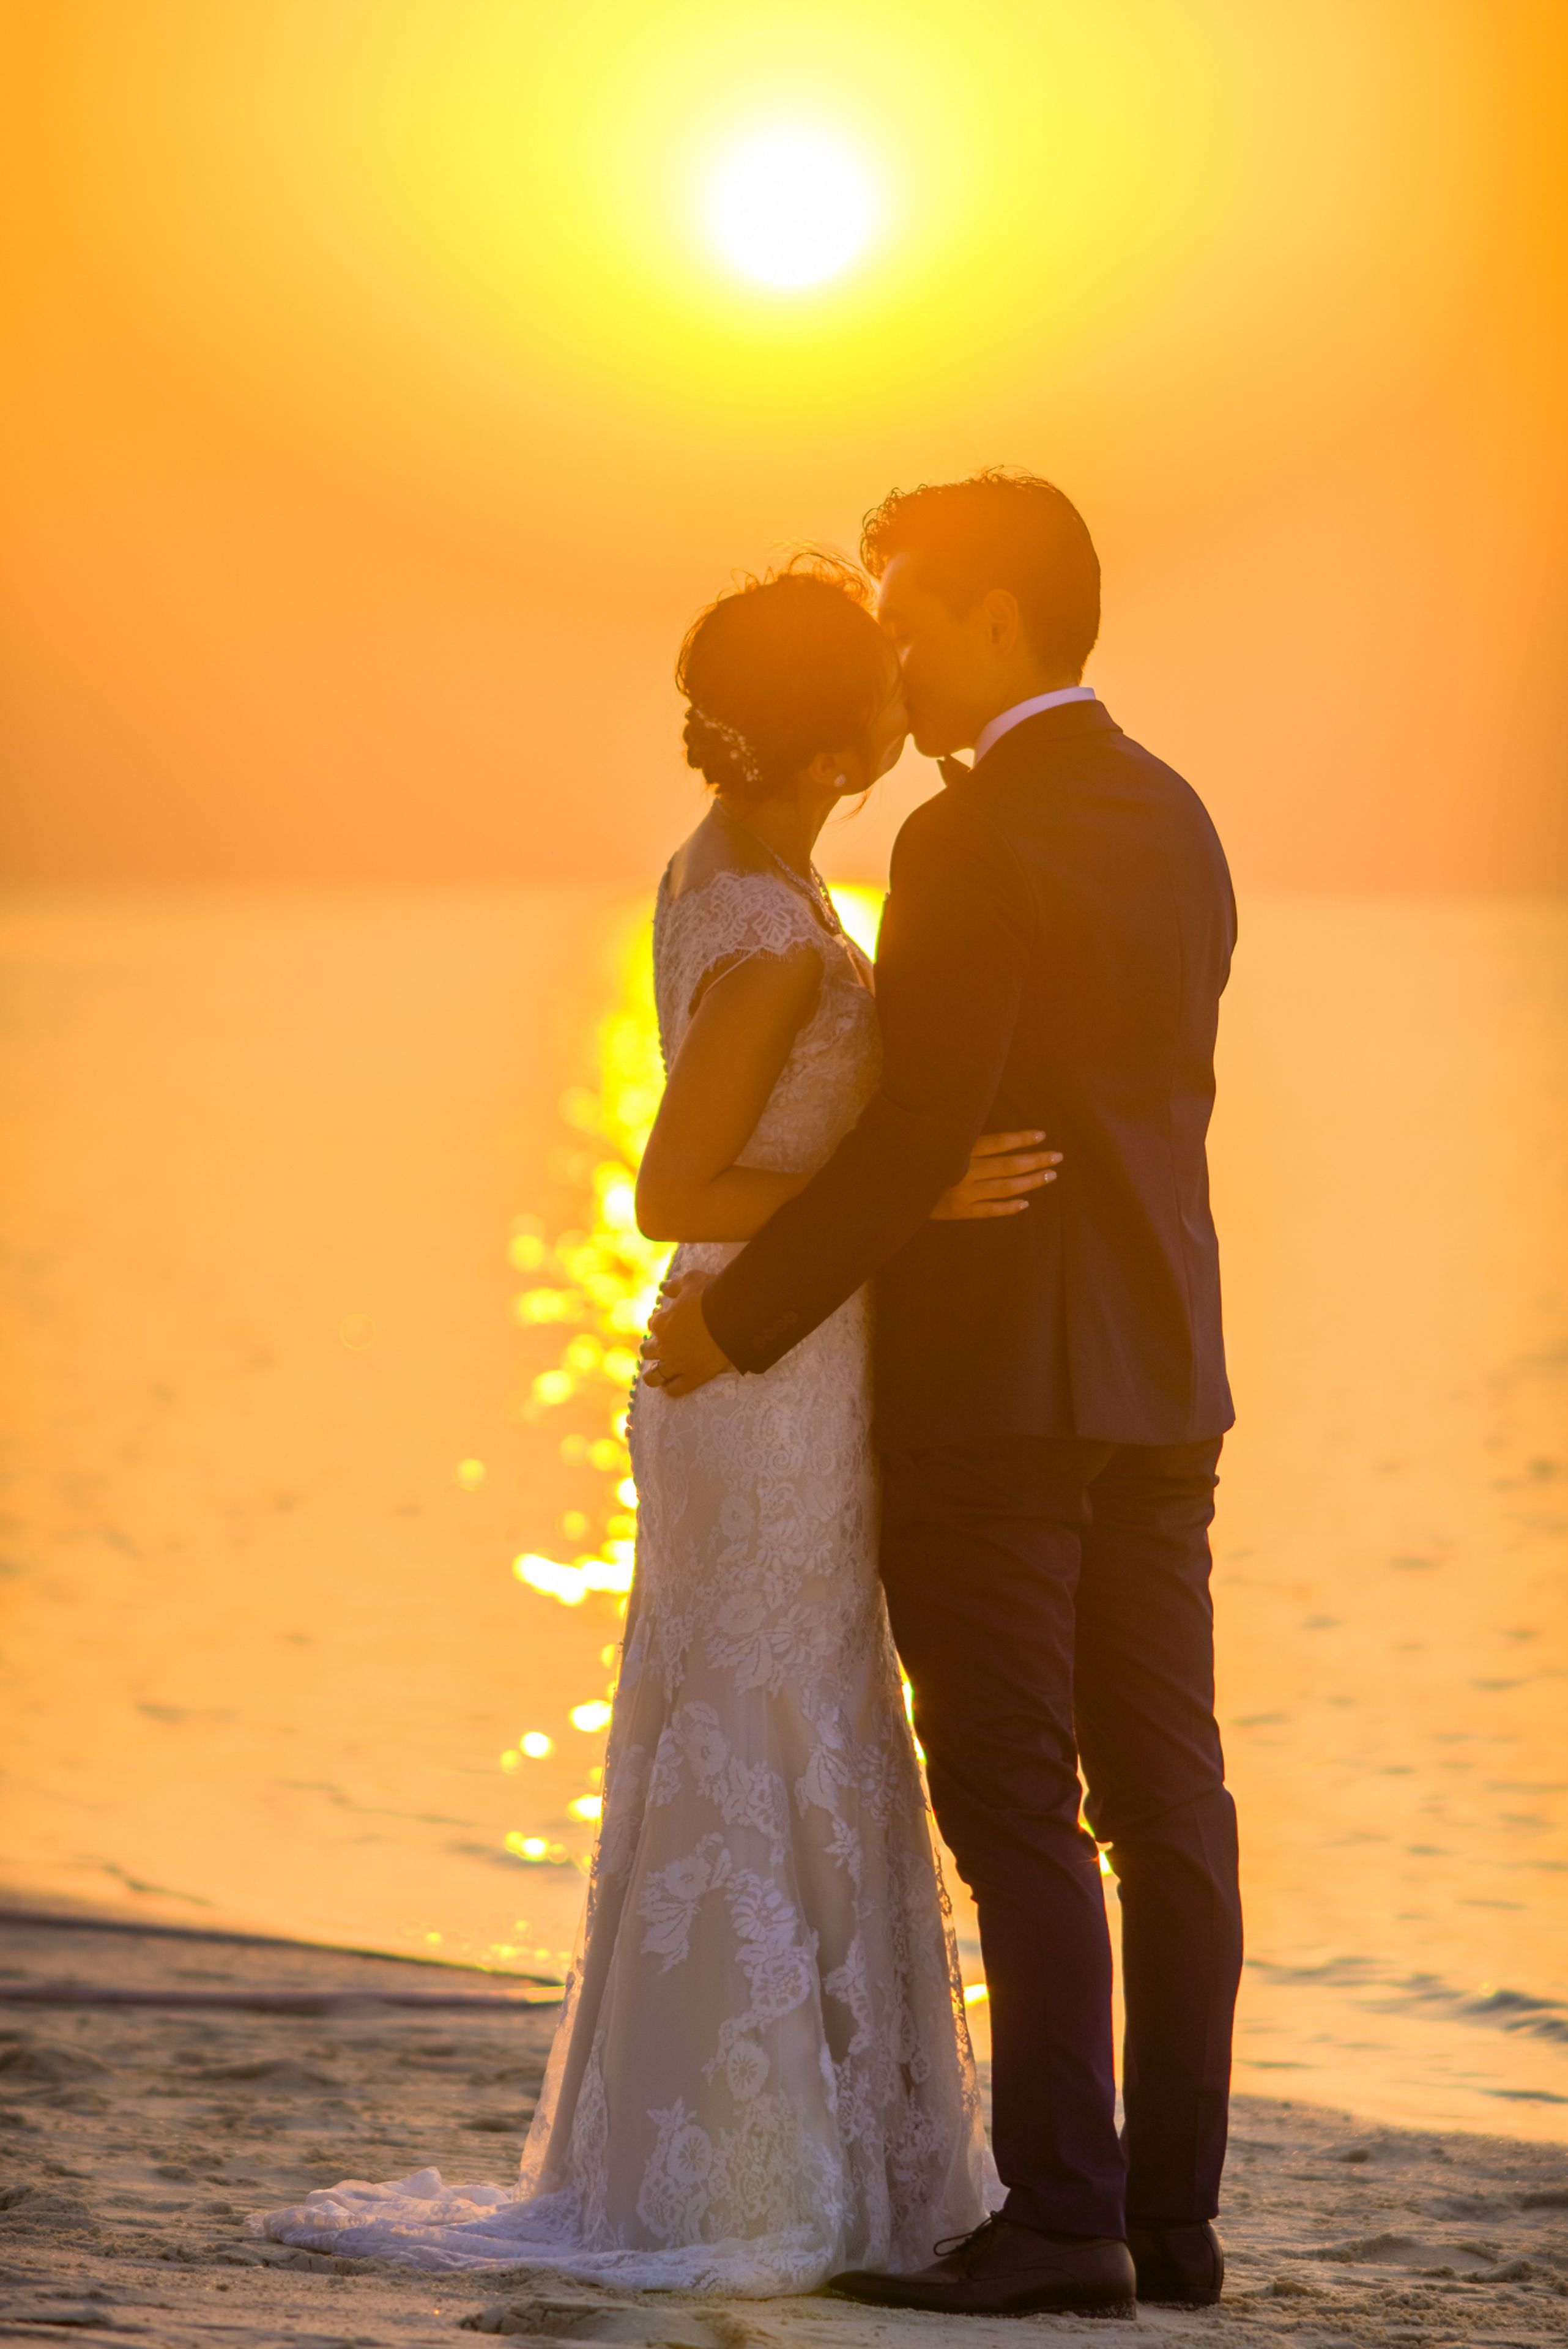 Man and Woman Kissing Under Sunset · Free